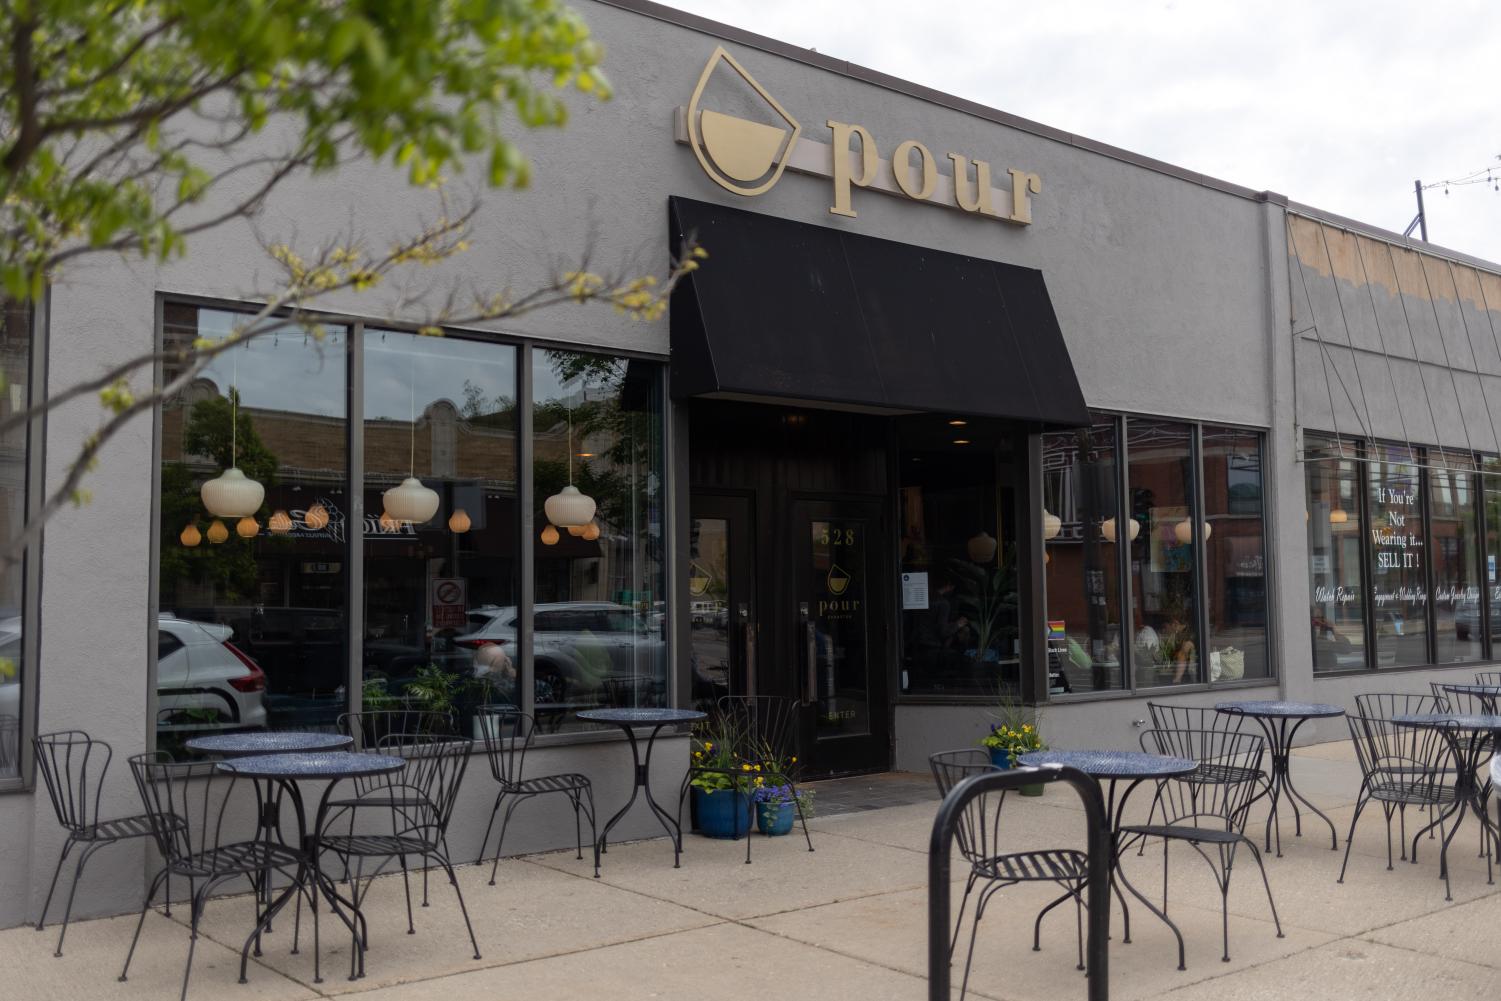 Exterior+photo+of+Evanston+Pour+with+outdoor+seating.